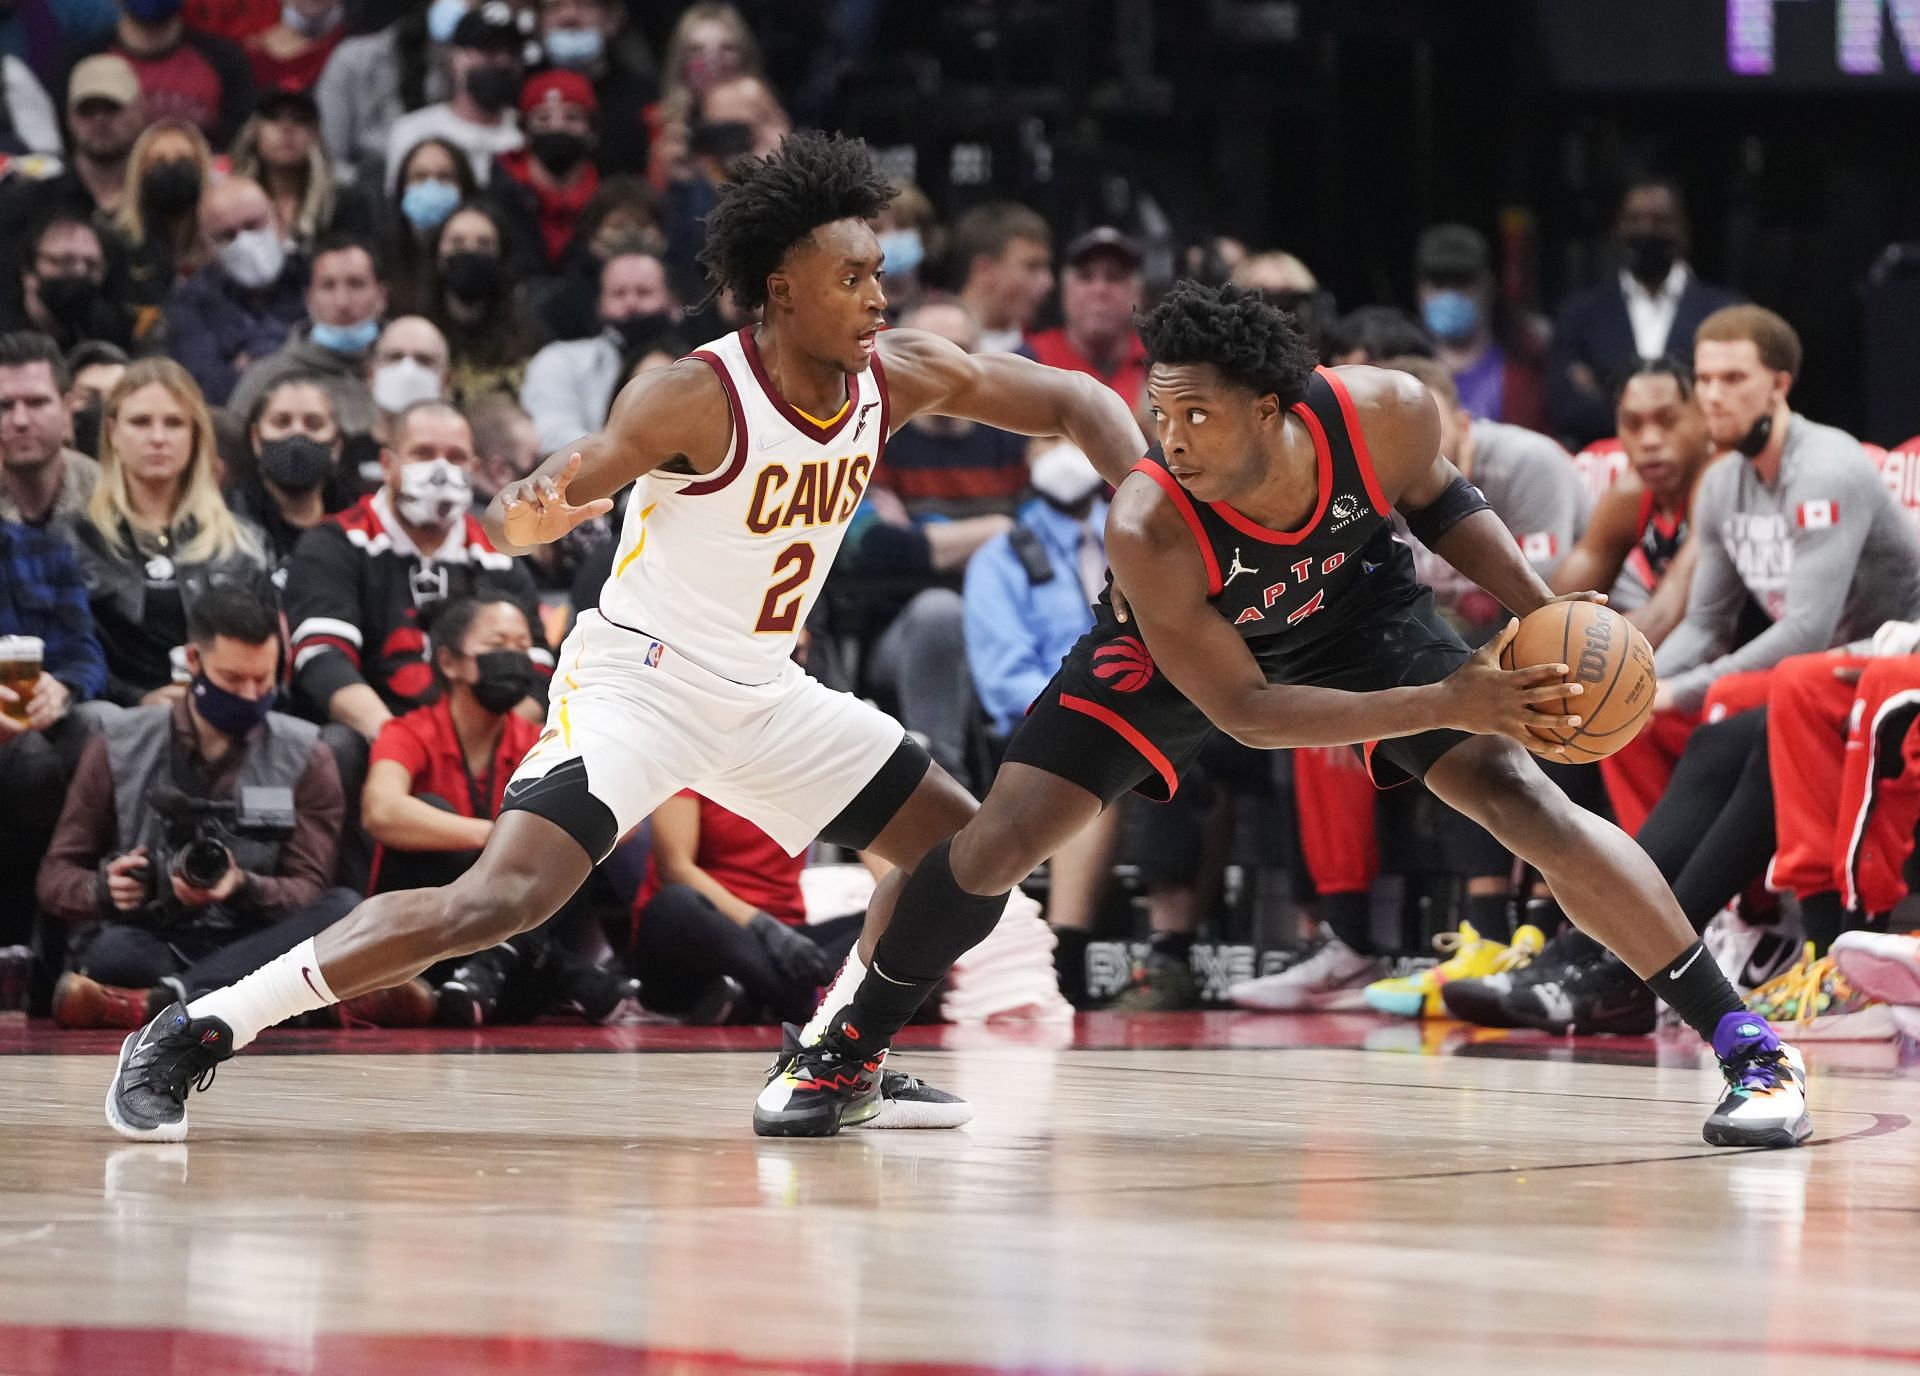 OG Anunoby #3 of the Toronto Raptors is guarded by Collin Sexton #2 of the Cleveland Cavaliers during the first half of their basketball game at the Scotiabank Arena on November 5, 2021 in Toronto, Ontario, Canada.